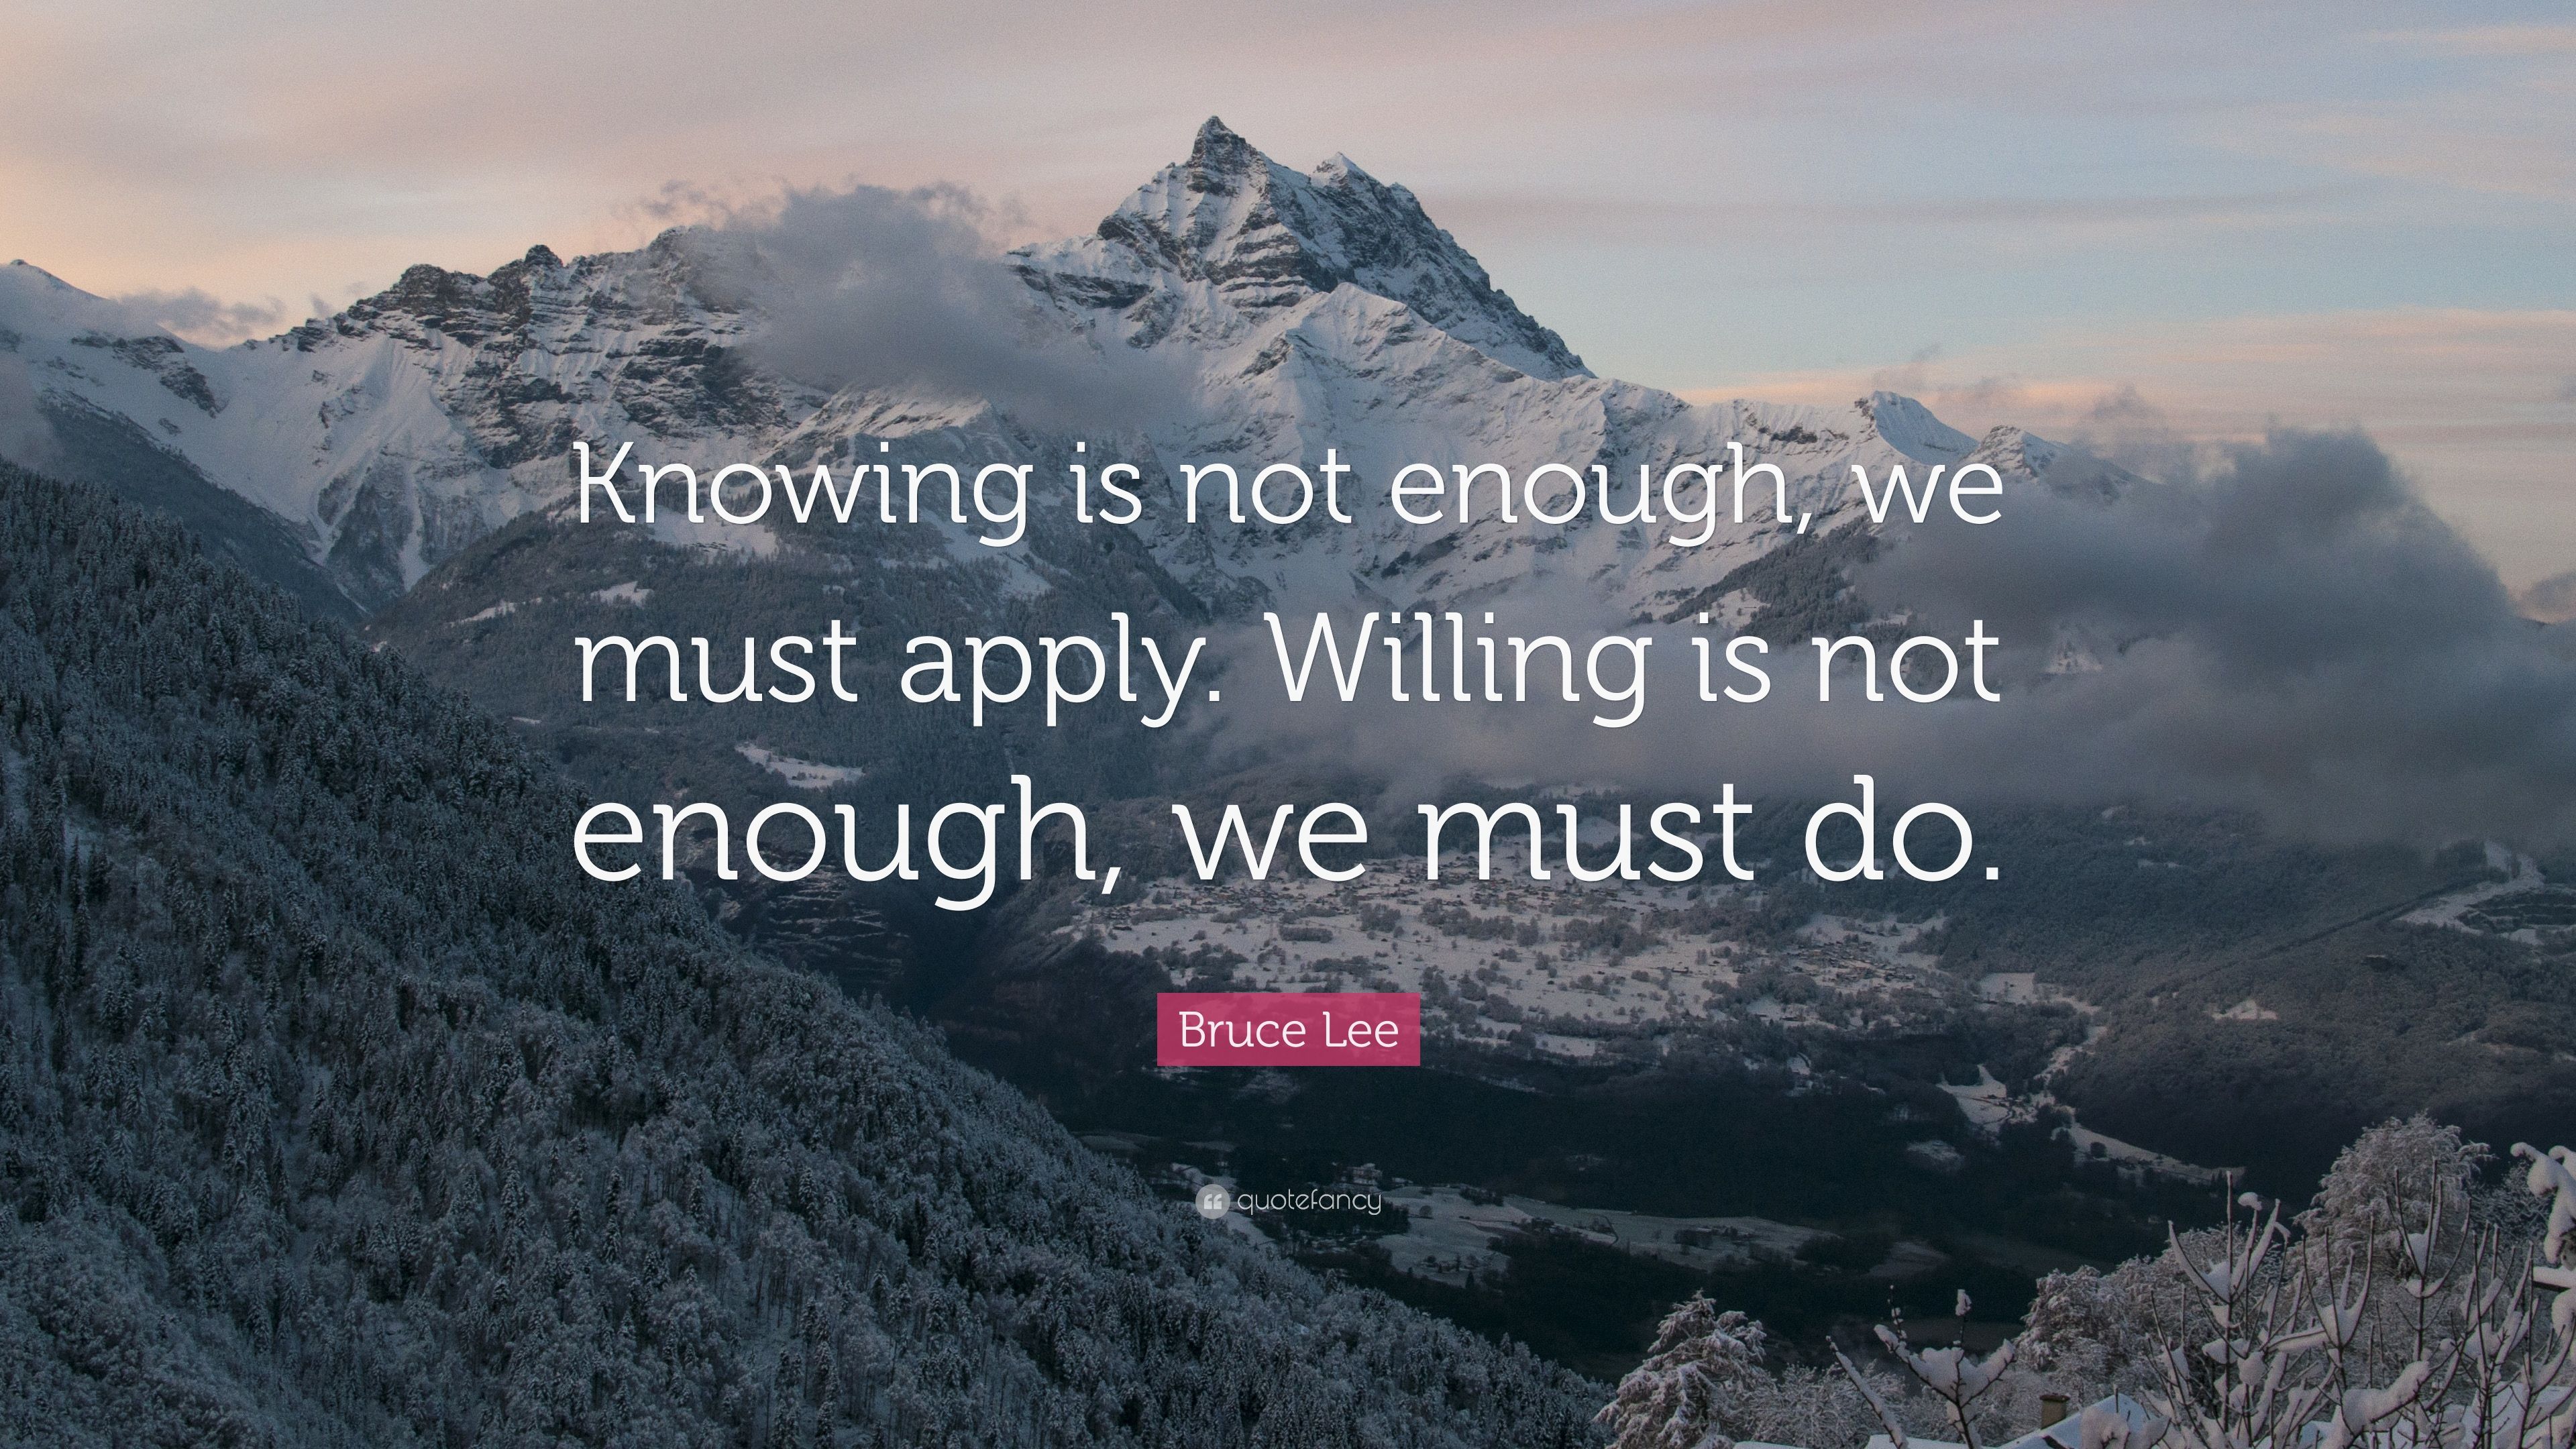 Bruce Lee Quote: “Knowing is not enough, we must apply